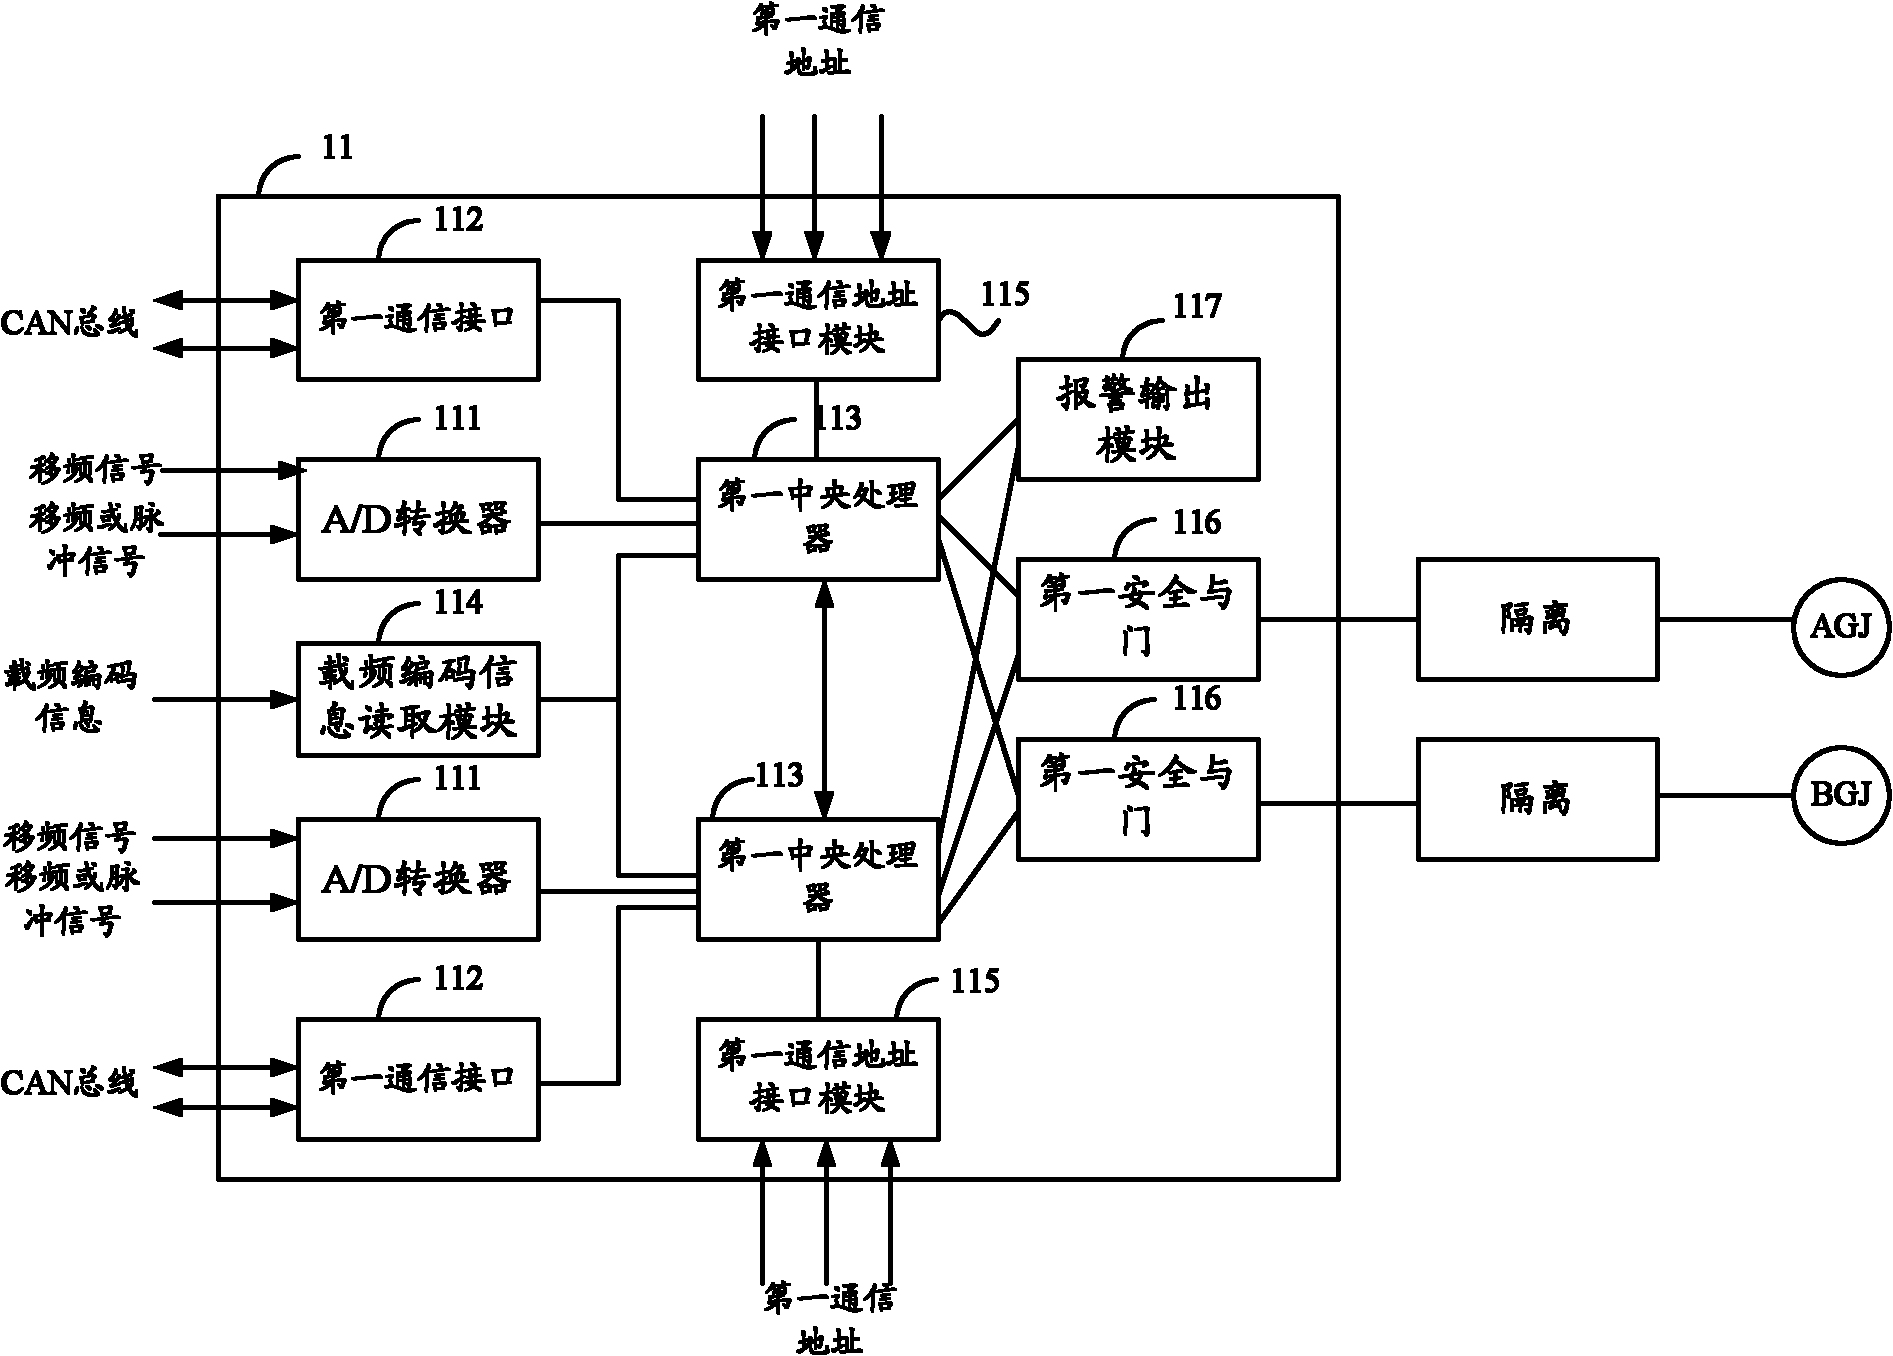 ZPW-2000A track circuit system